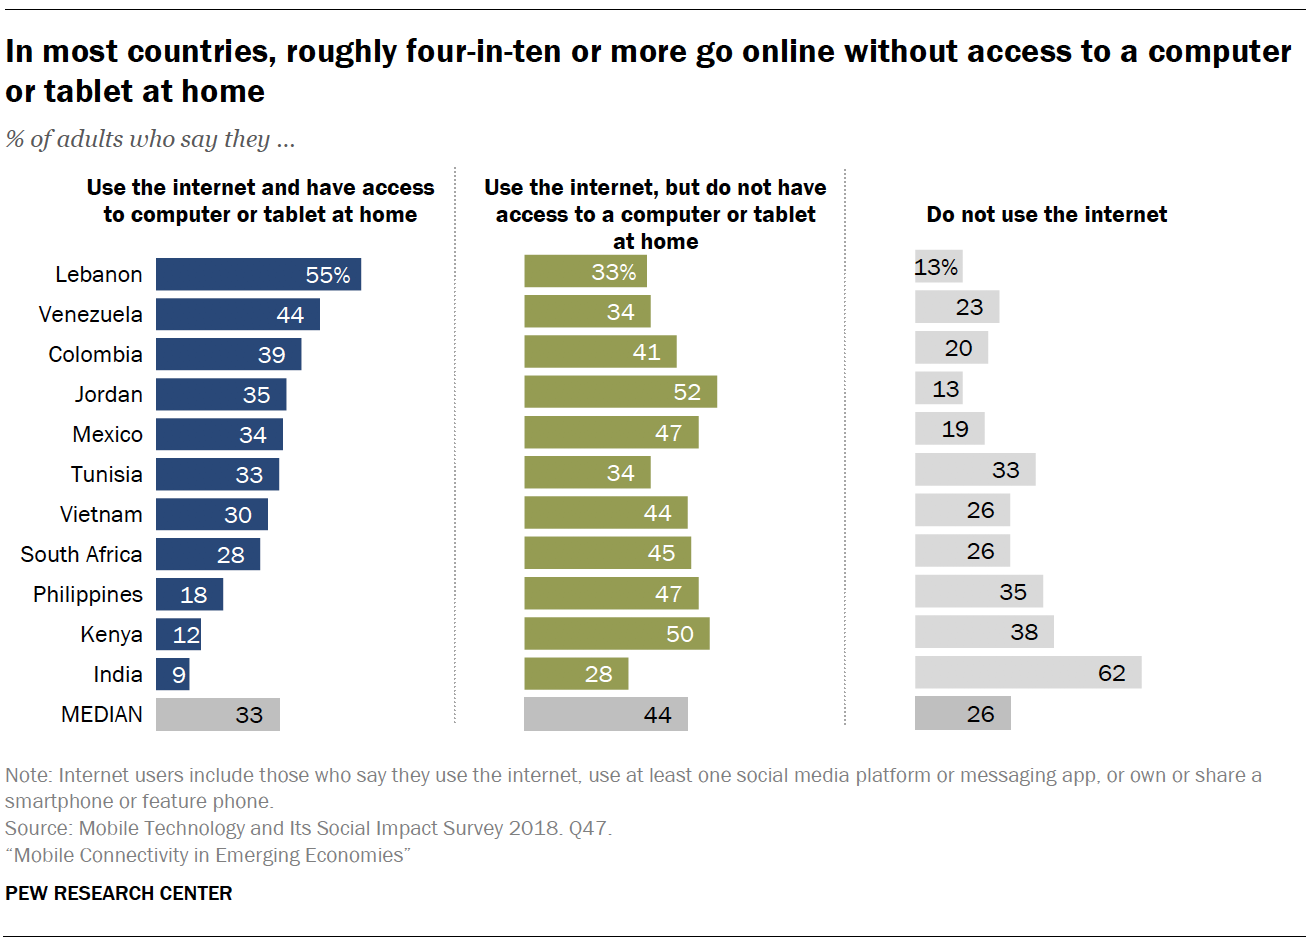 In most countries, roughly four-in-ten or more go online without access to a computer or tablet at home